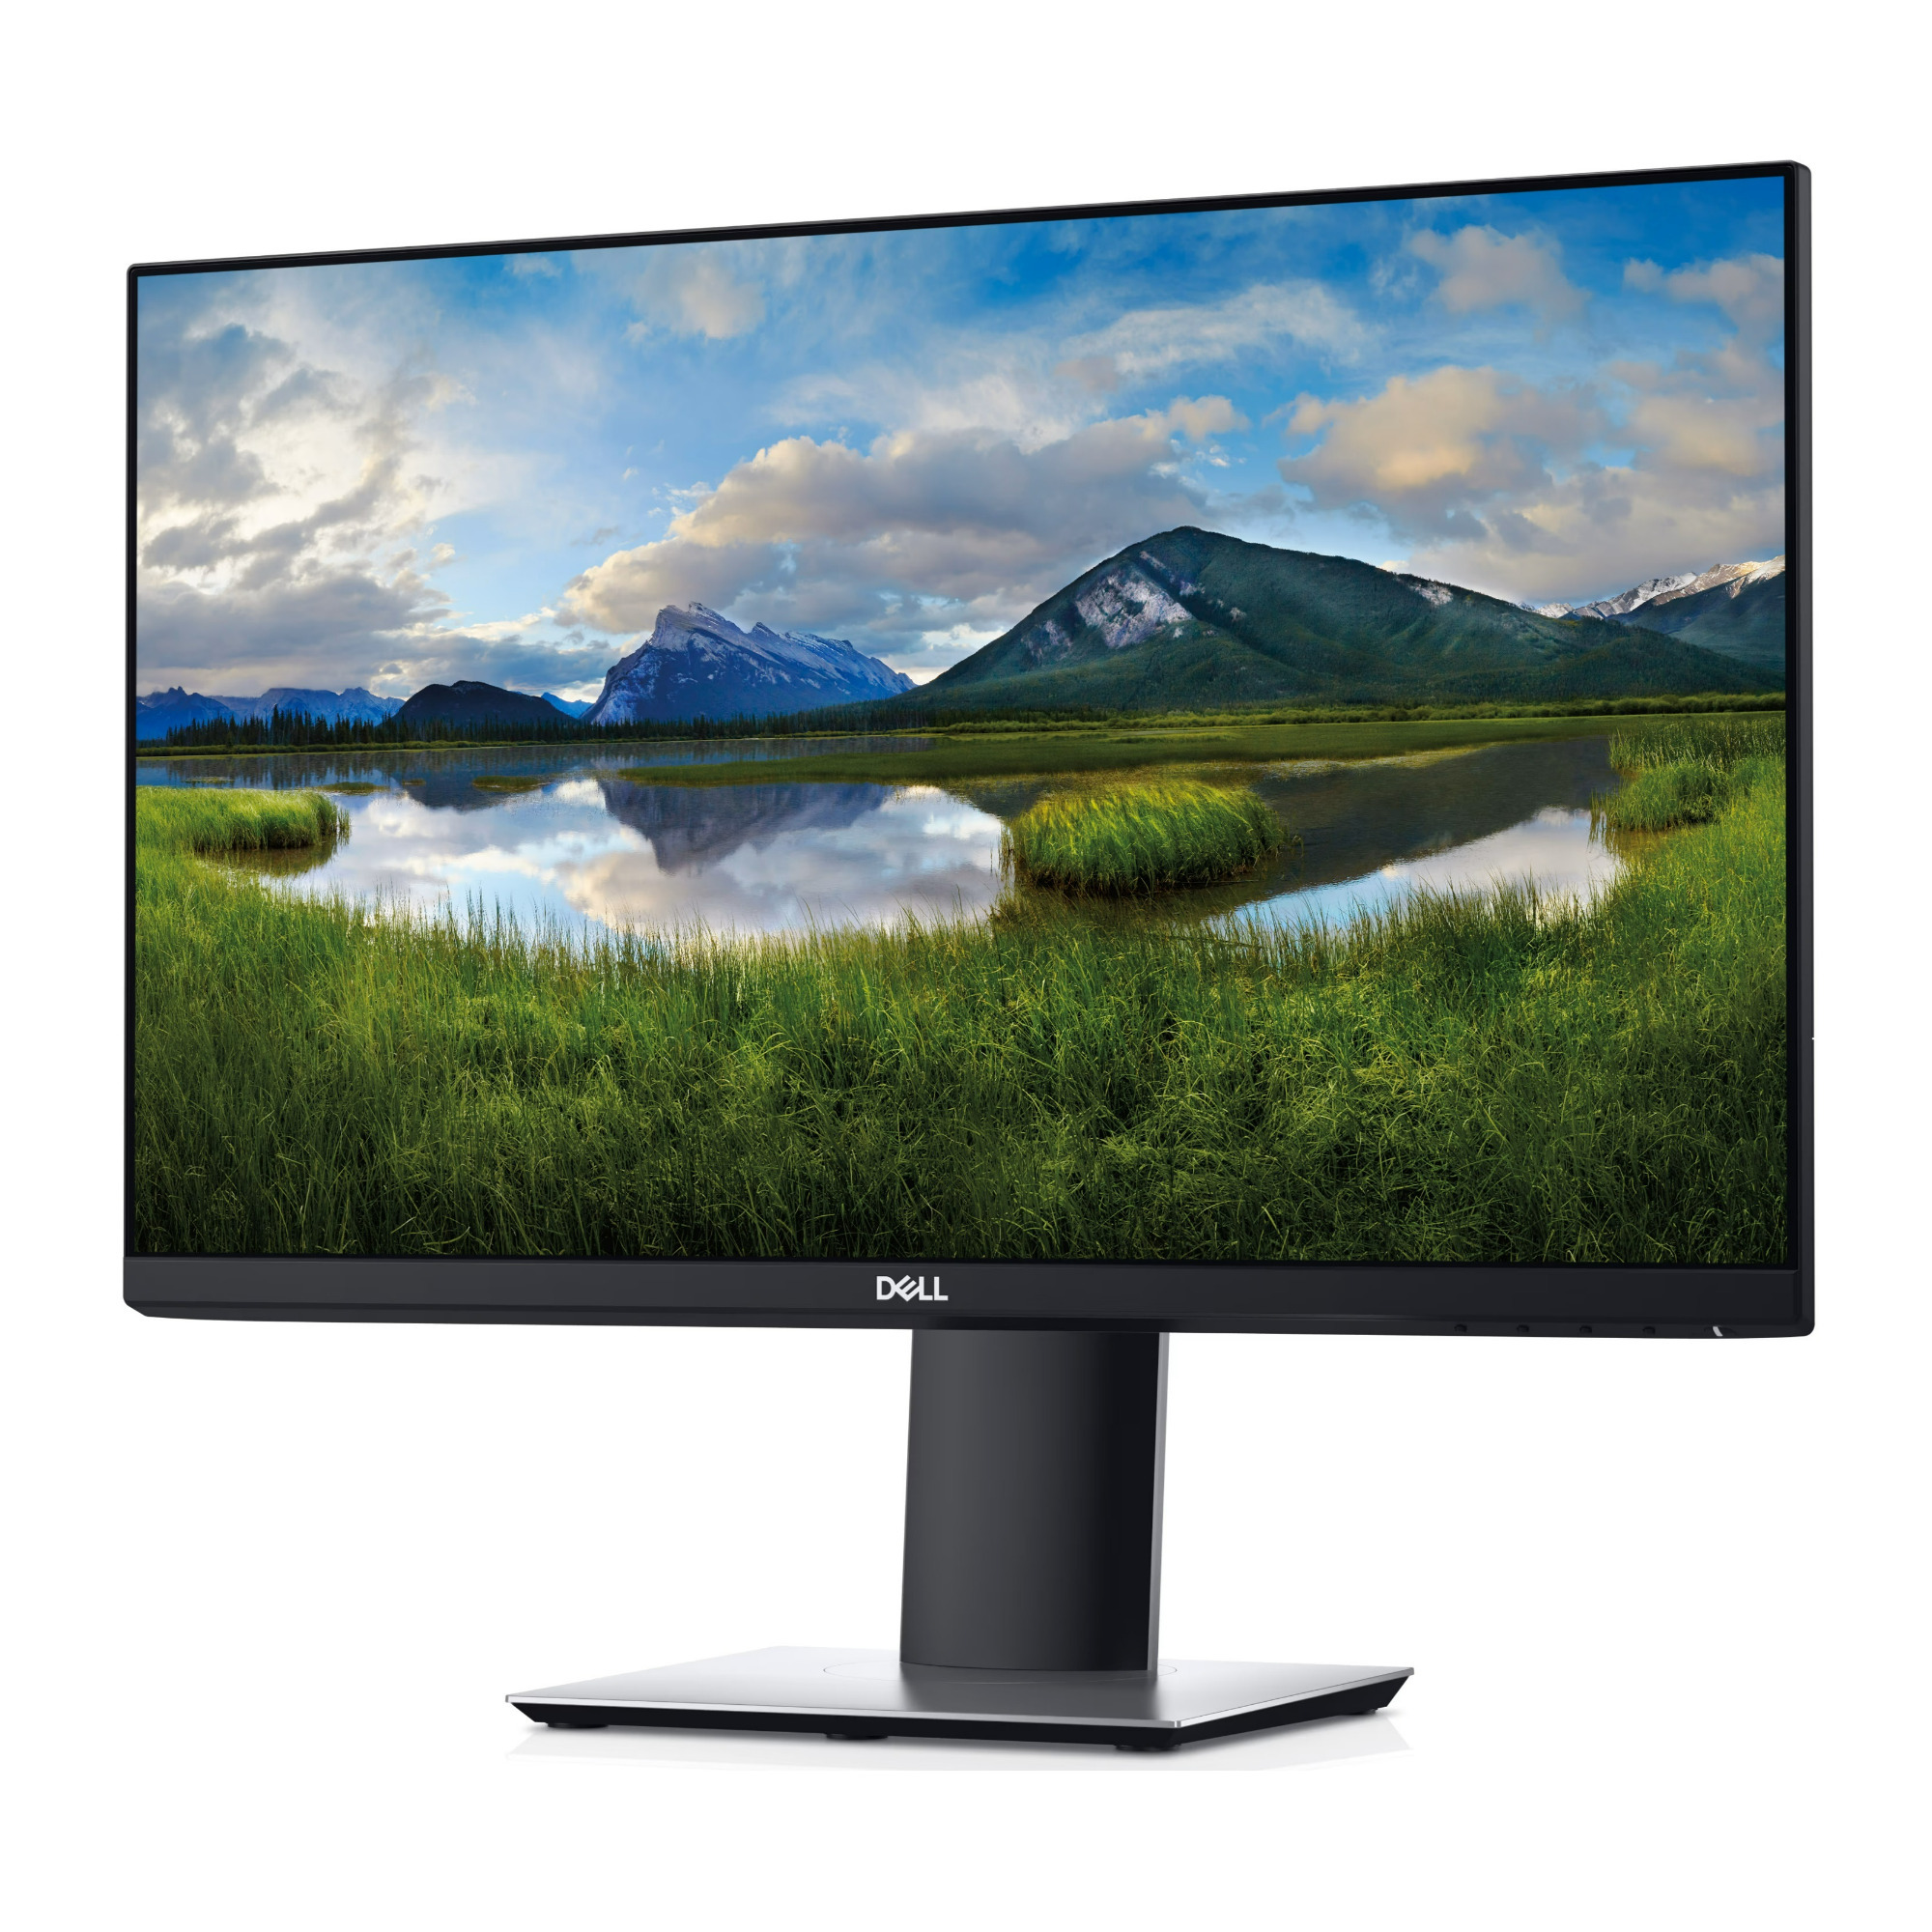 Dell Computers Dell P2319H 23-Inch Monitor Full HD 1920 x 1080 IPS Display with DP, HDMI, and USB Ports (Renewed) in Black -  DELLP2319H-R-1